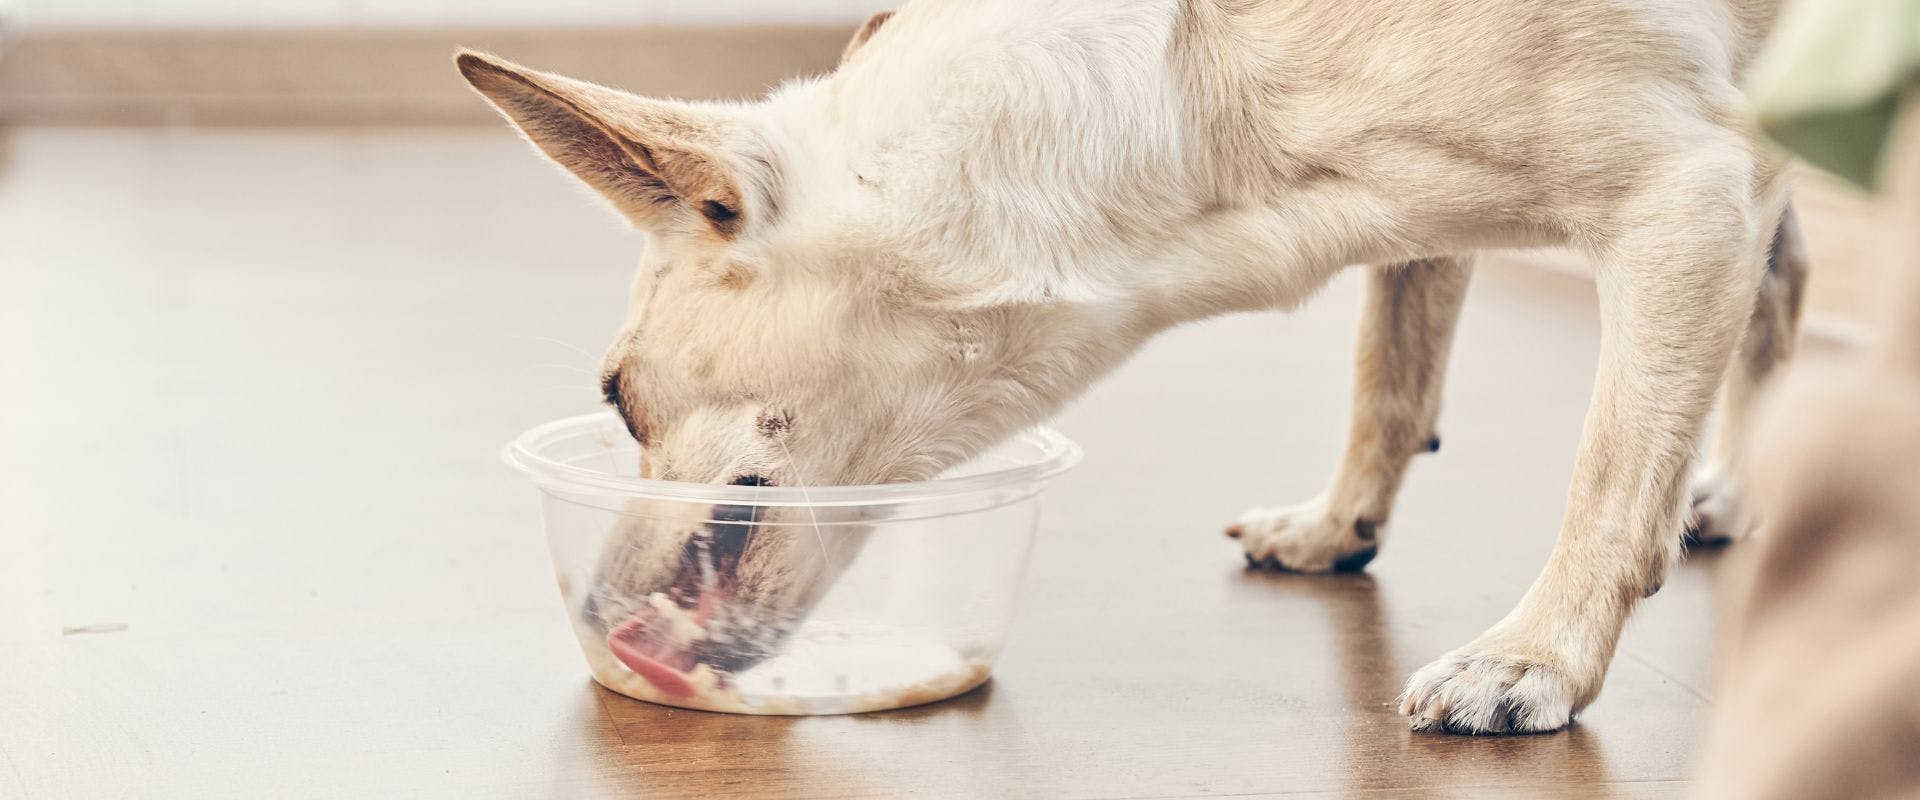 White dog eating from a plastic bowl